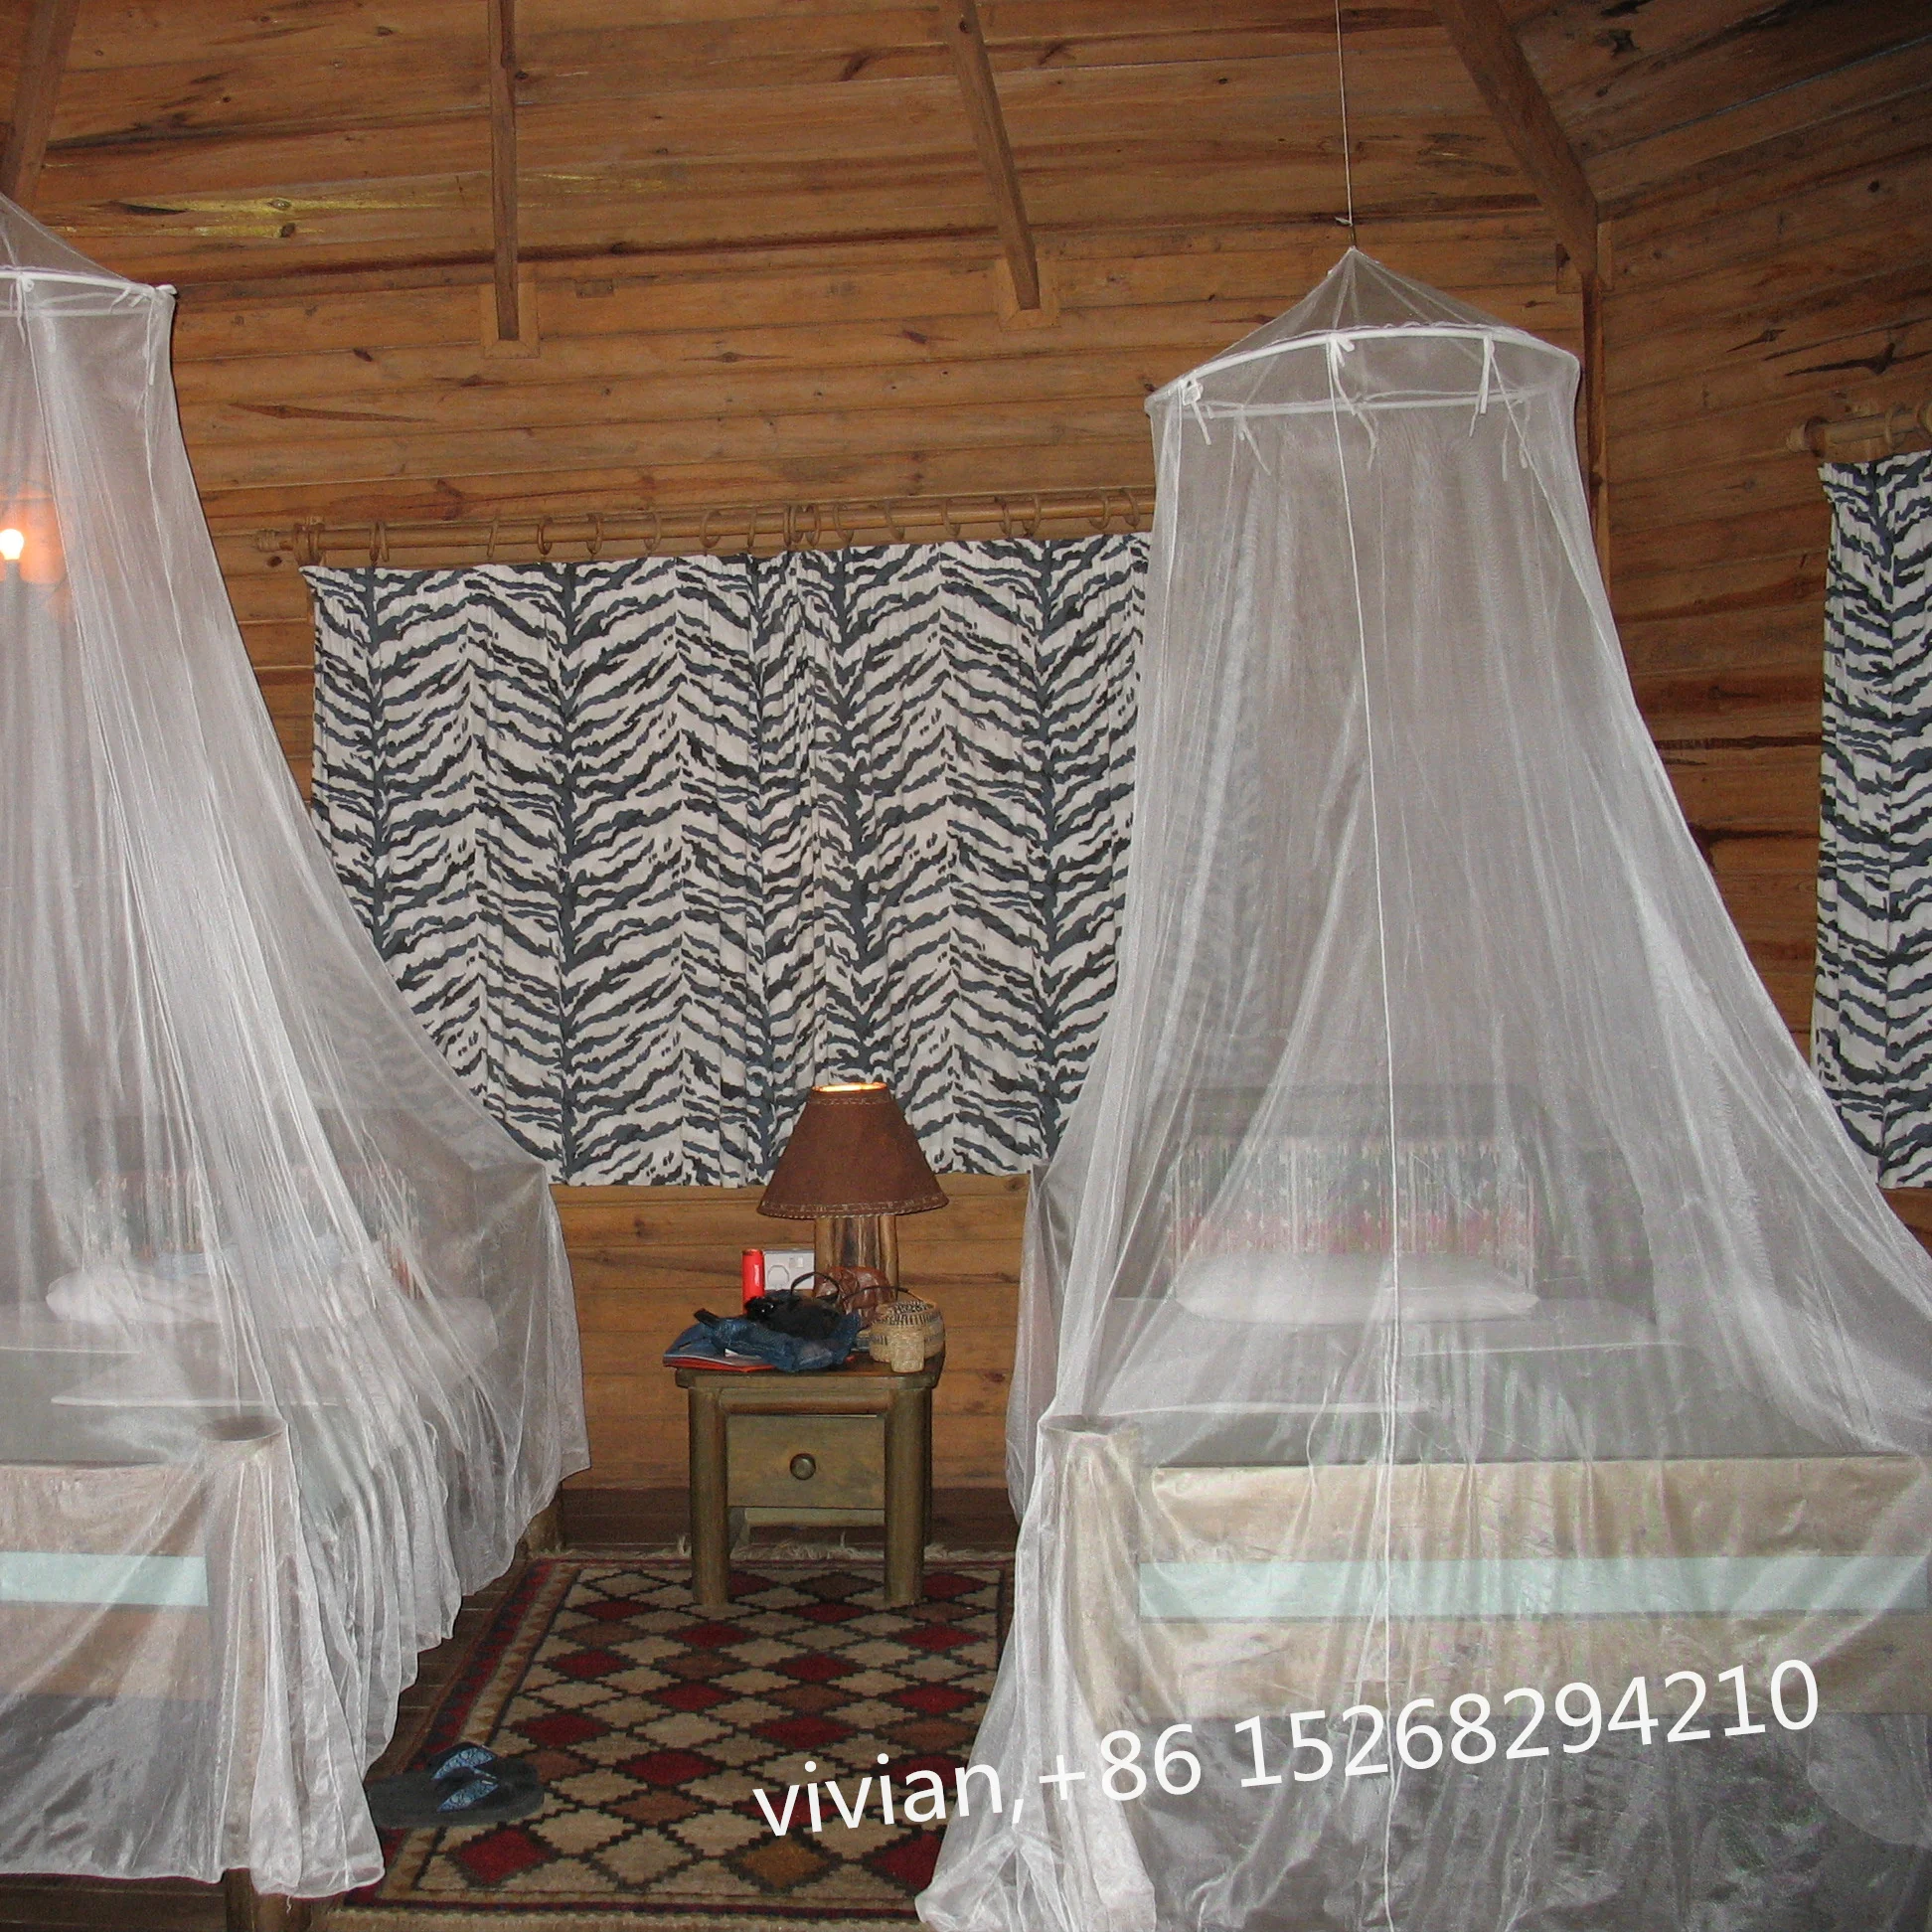 Rectangular  Mosquito Net Factory  Manufacturer Cheap Long lasting Insecticide Treated Mosquito Net for Africa LLIN